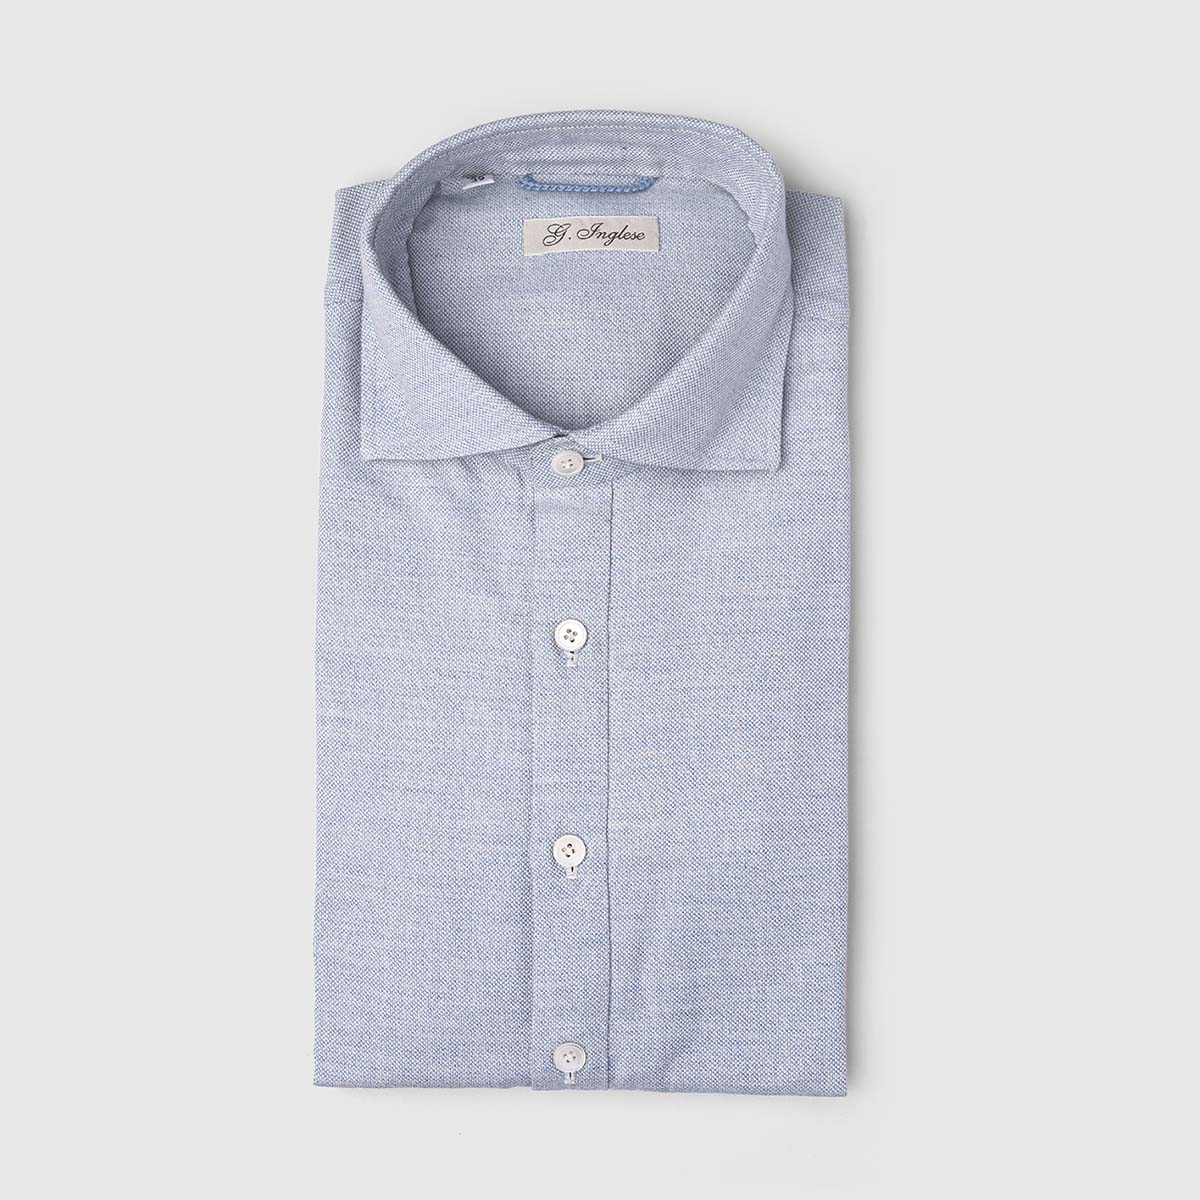 Collared Brushed Polo Shirt in Light Blue G. Inglese on sale 2022